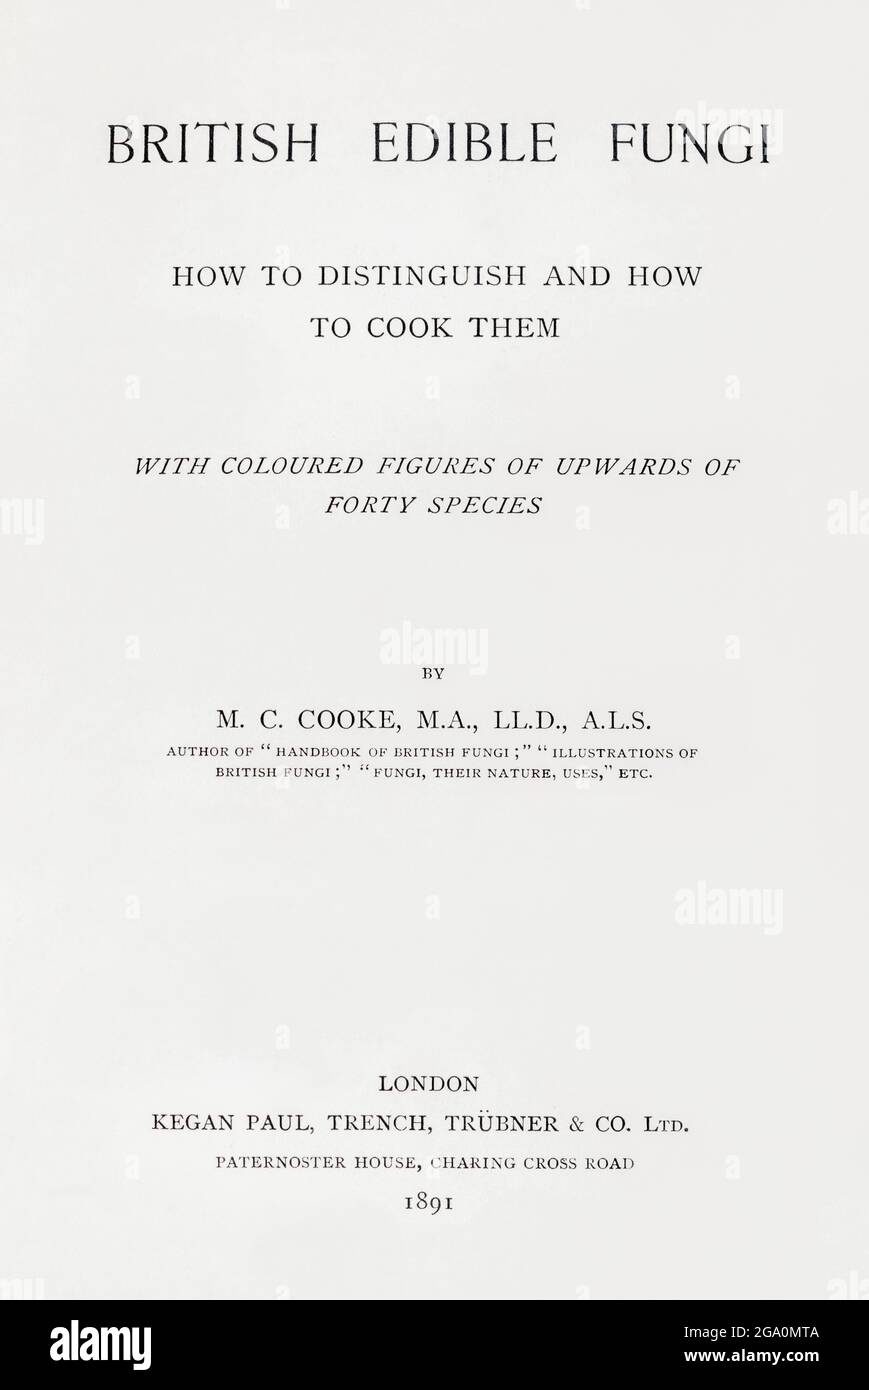 Frontpiece / title page of the Victorian mycology work 'British Edible Fungi', a famous British book on fungus by Mordecai Cooke, published in 1891. Stock Photo